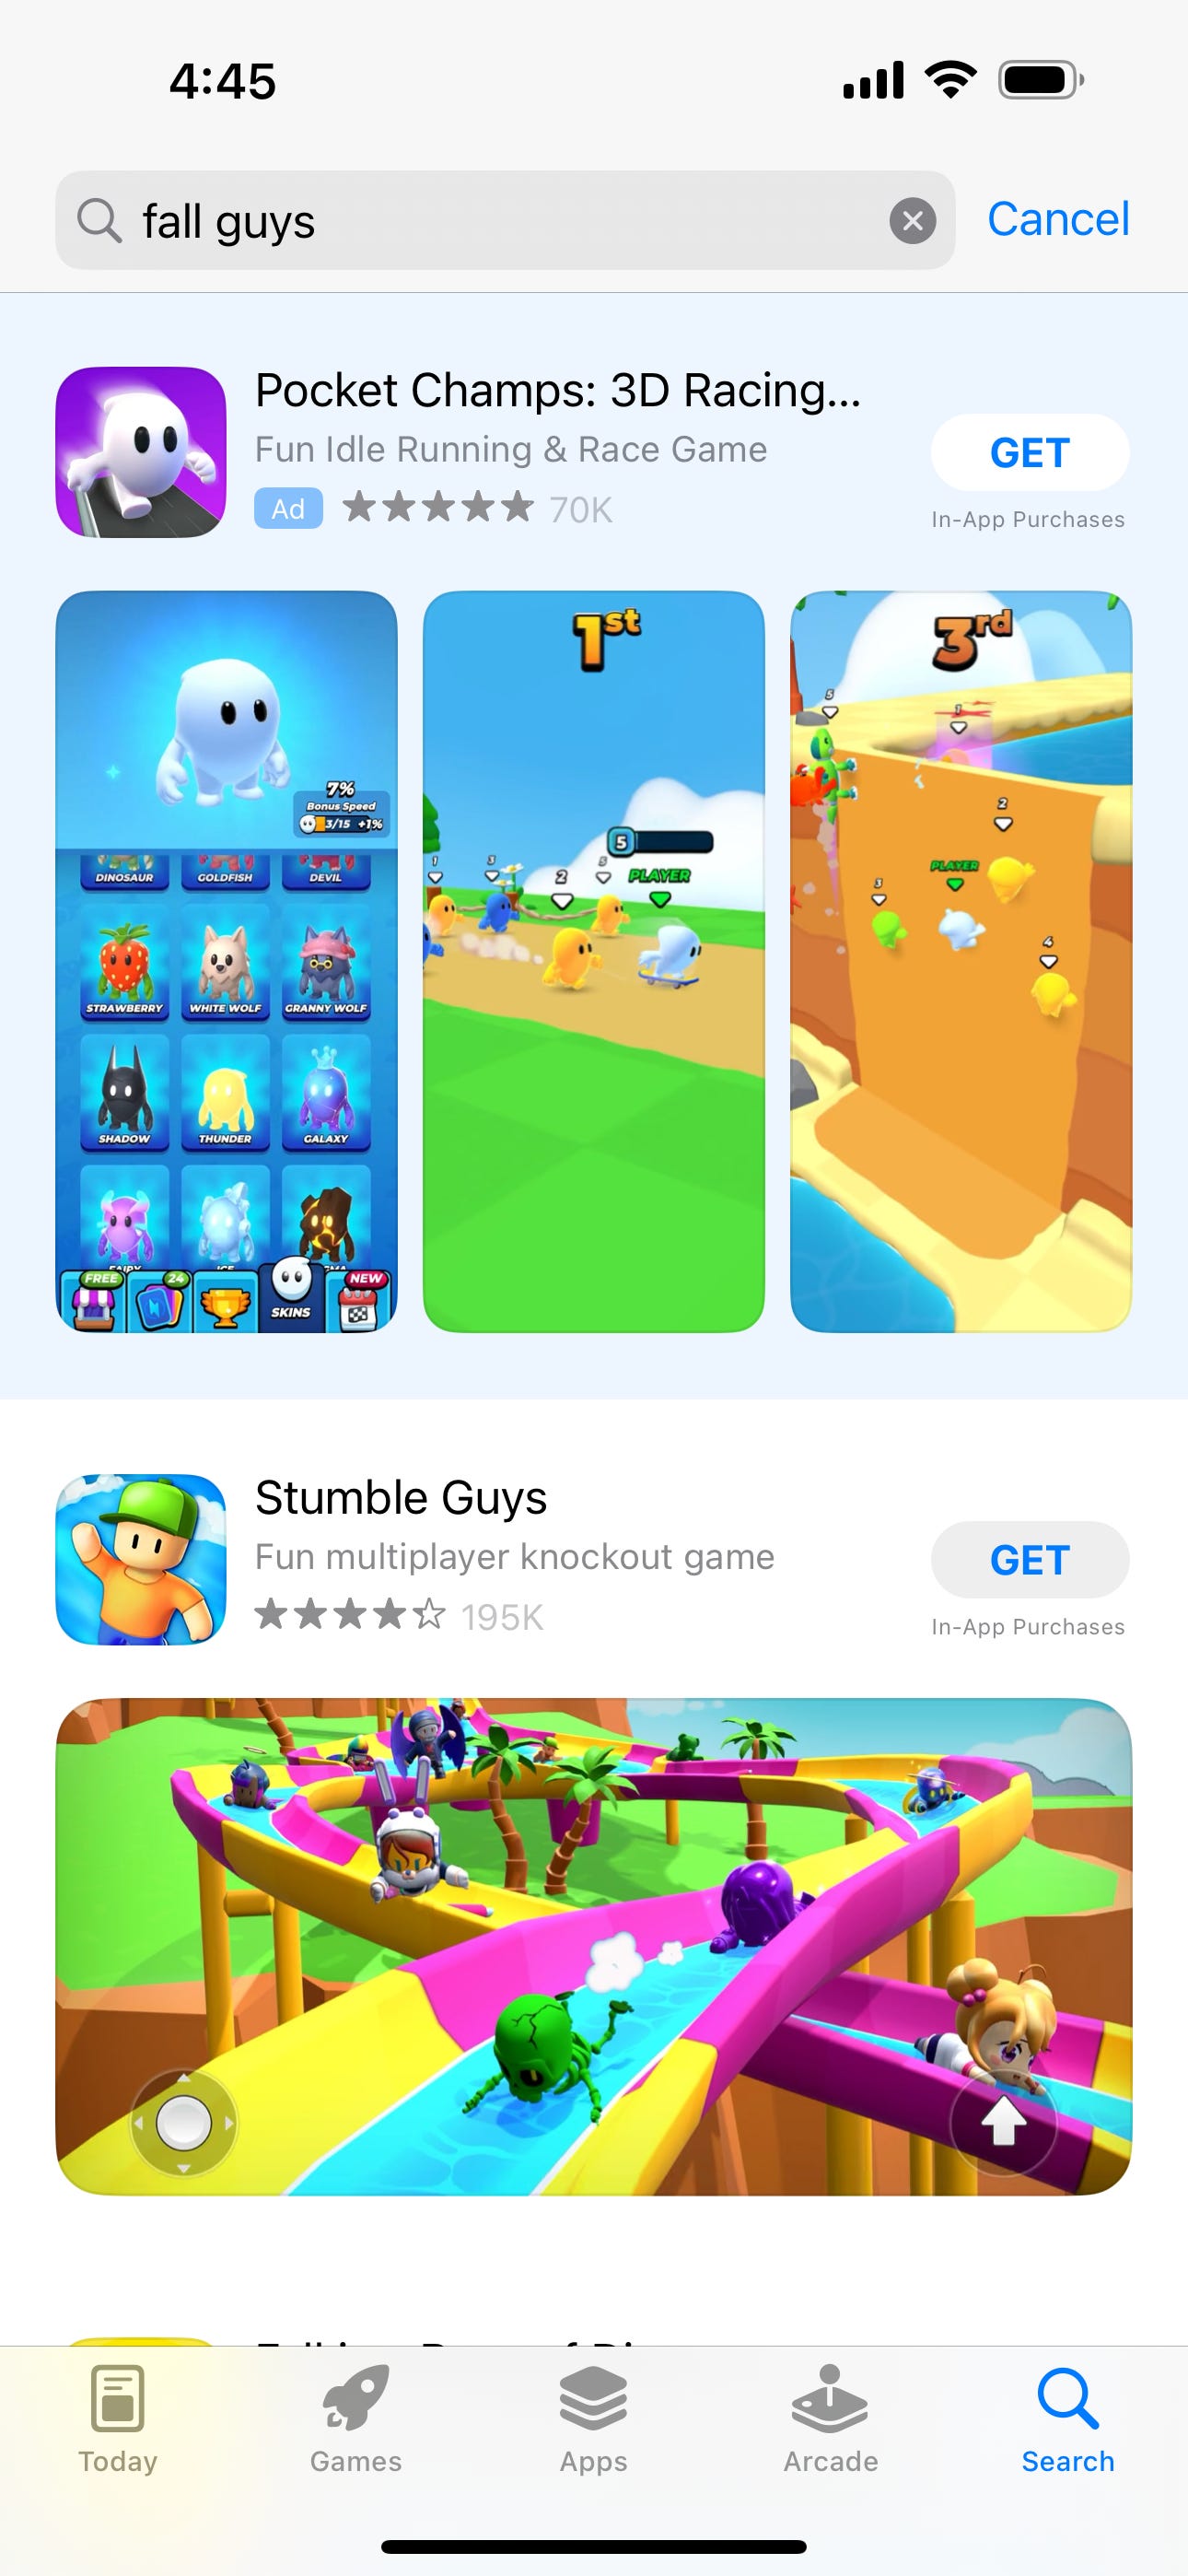 A Fall Guys clone called Stumble Guys has topped the iPhone game charts